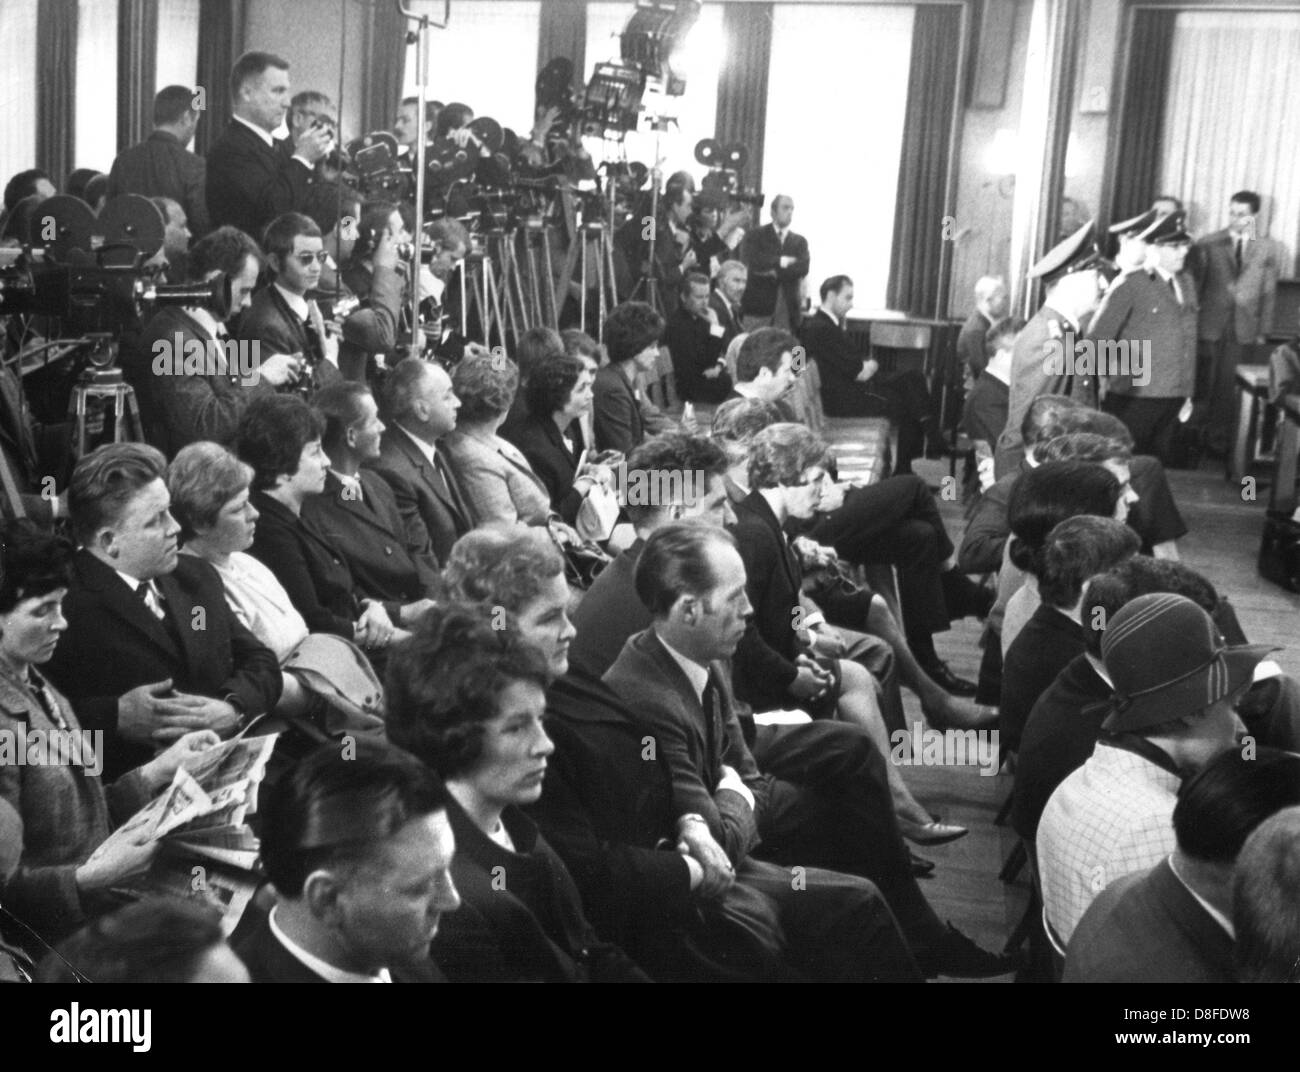 View of the courtroom photographed on 27 May 1968. The trial against seven high ranking employees of the Stollberg-based Grünenthal company, makers of the drug Contergan, began on 27 May 1968 in the miner's canteen 'Anna' in Alsdorf near Aachen, Germany. The trial started with an argument about the formal legal proceedings. The seven employees were charged with involuntary manslaughter, involuntary assault and the violation of German pharmaceutical laws. Stock Photo